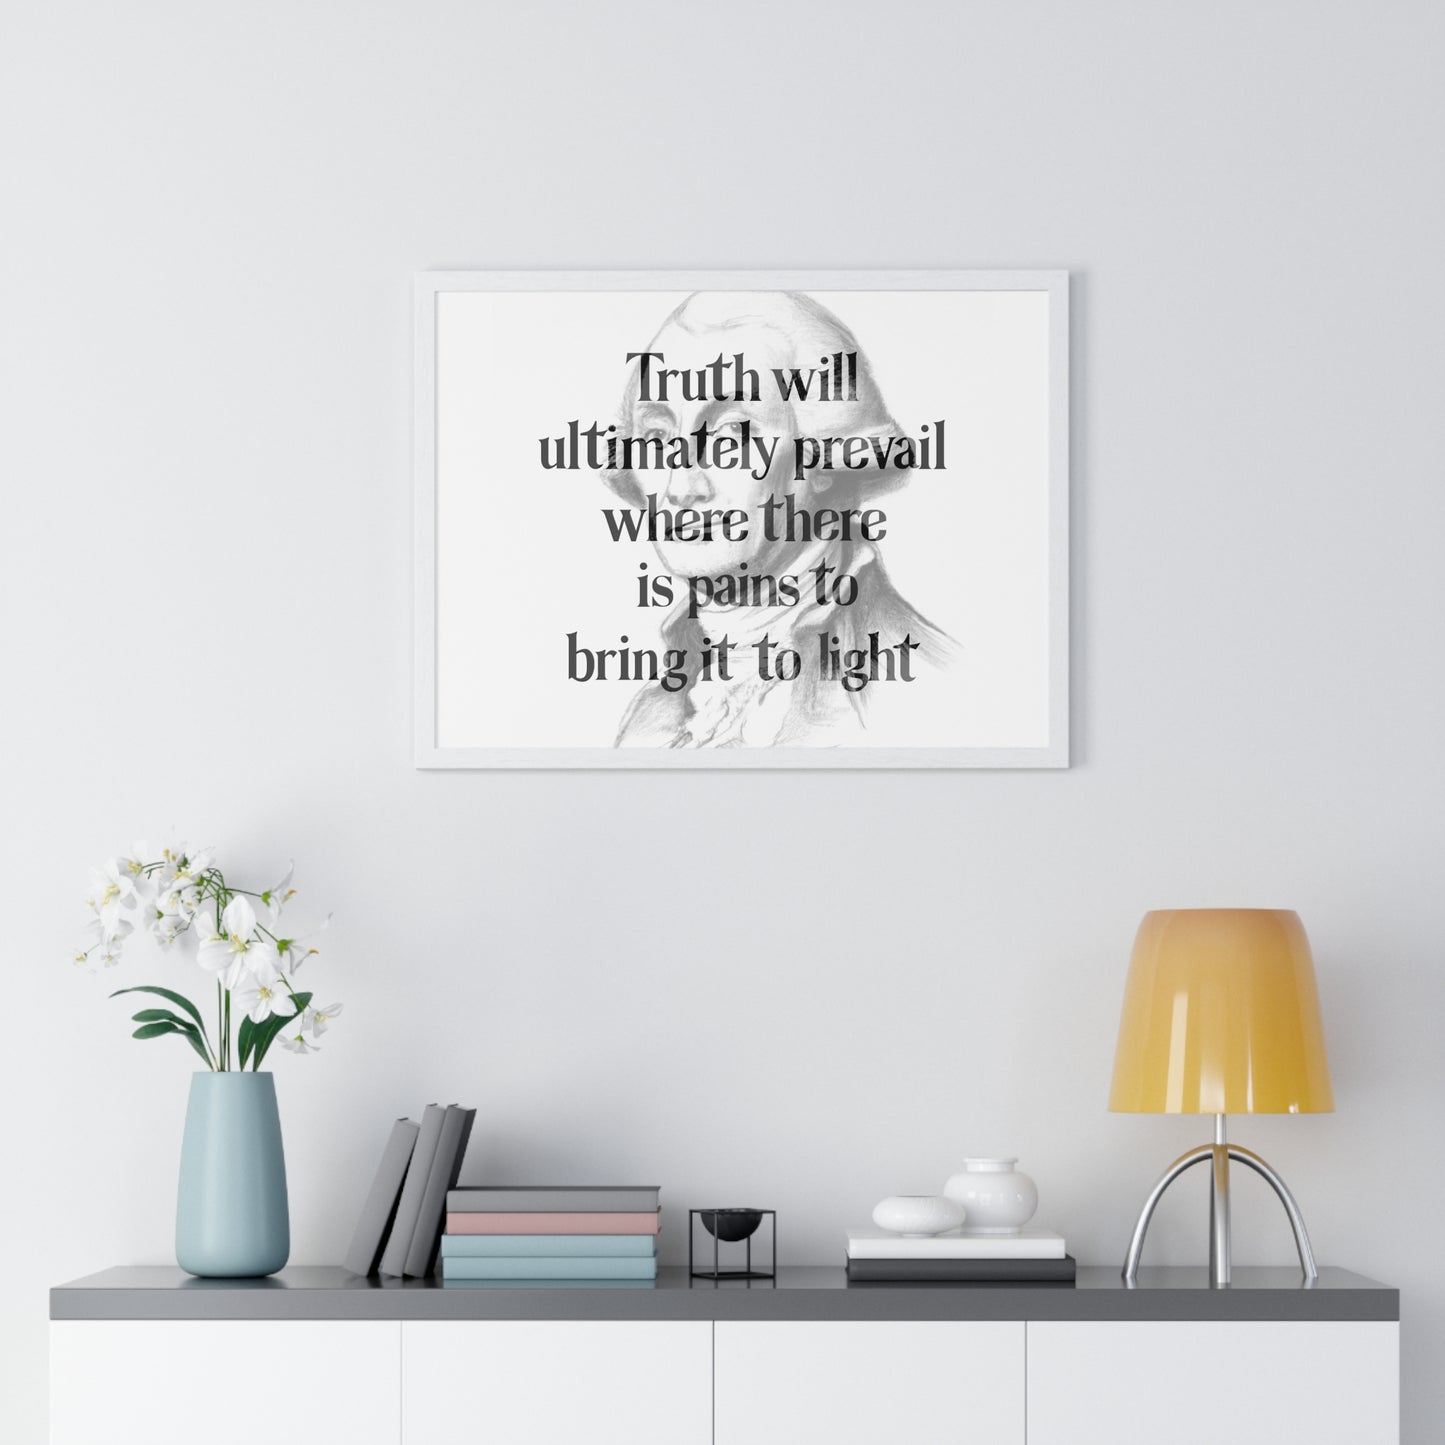 George Washington Quote 2, Poster Print, Horizontal, Light, 1st President of the United States, American Patriots, AI Art, Political Art, Presidential Portraits, Presidential Quotes, Inspirational Quotes